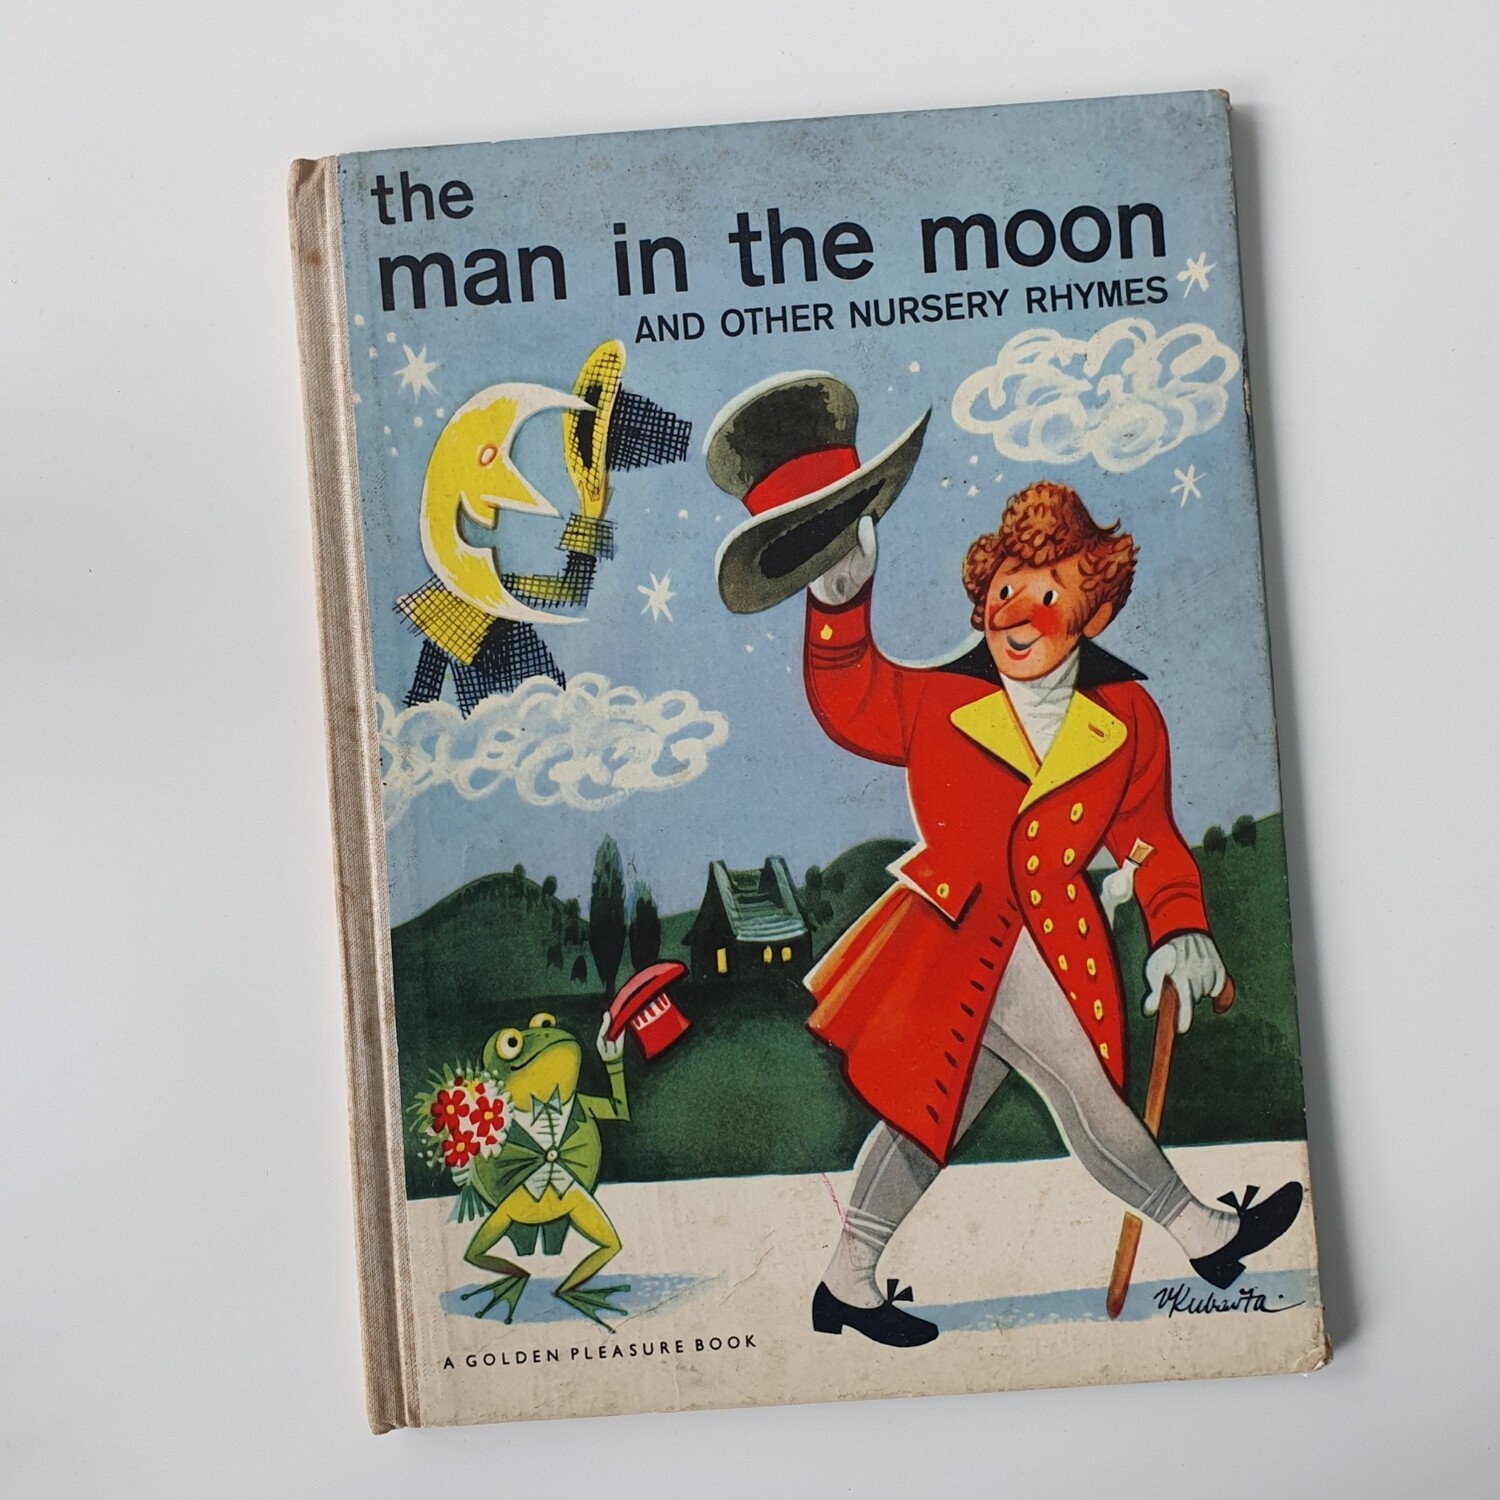 The Man in the Moon and other Nursery Rhymes - no original book pages